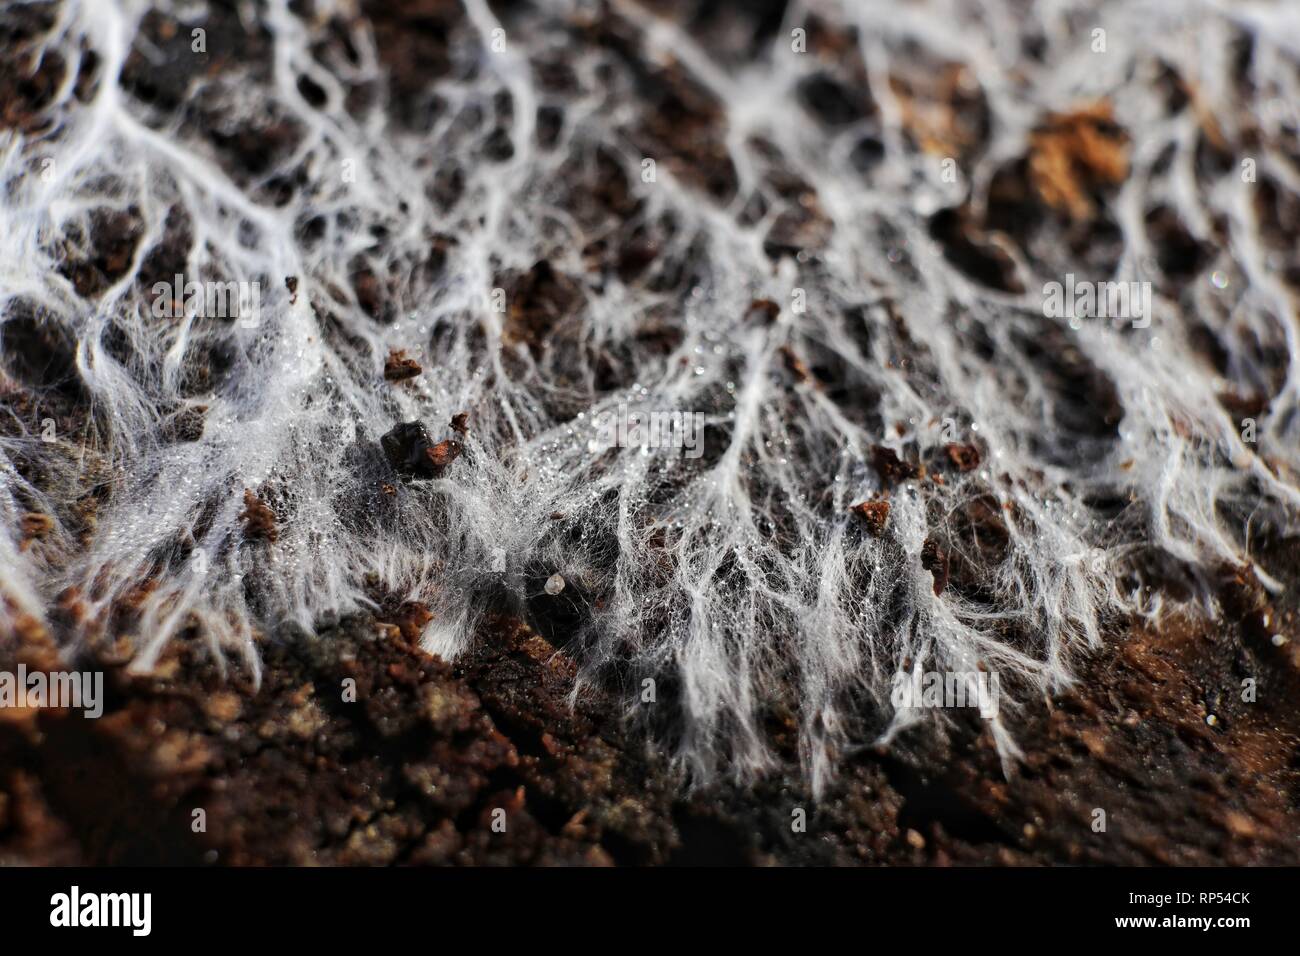 A macro image of fungal mycelium, or hyphae ramifying over the surface of a wooden block. This mycelial network normally only occurs underground. Stock Photo